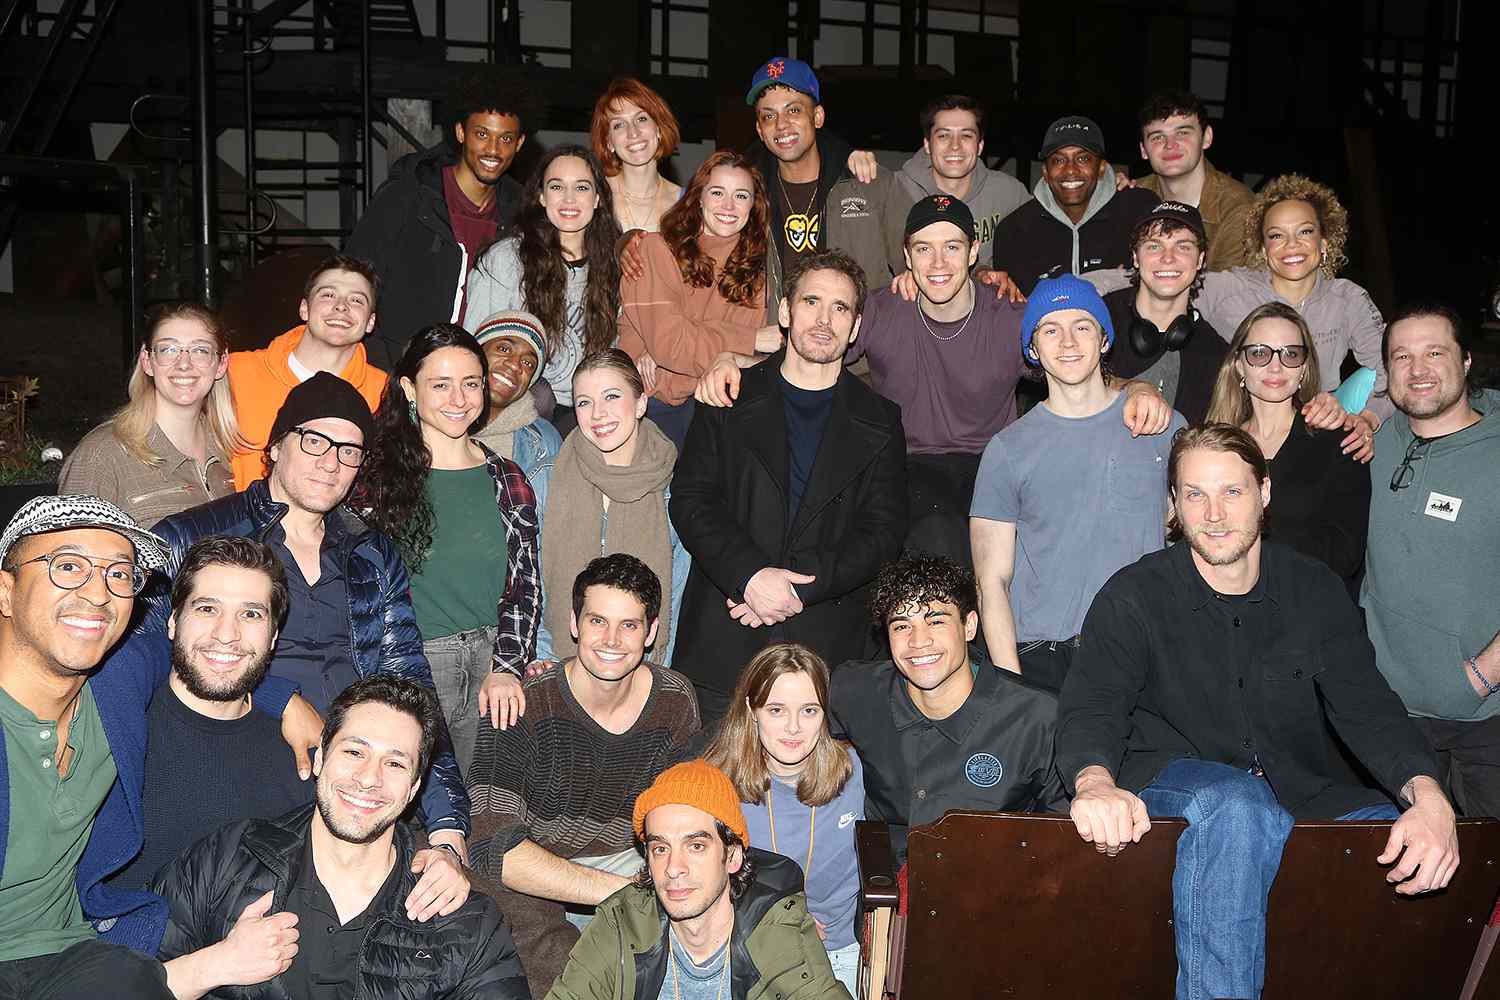 Producer Angelina Jolie, Producer Vivienne Jolie-Pitt, Original film star Matt Dillon, Director Danya Tamor, Book Writer Adam Rapp pose with the cast and company backstage at the new musical based on the classic book "The Outsiders" on Broadway 